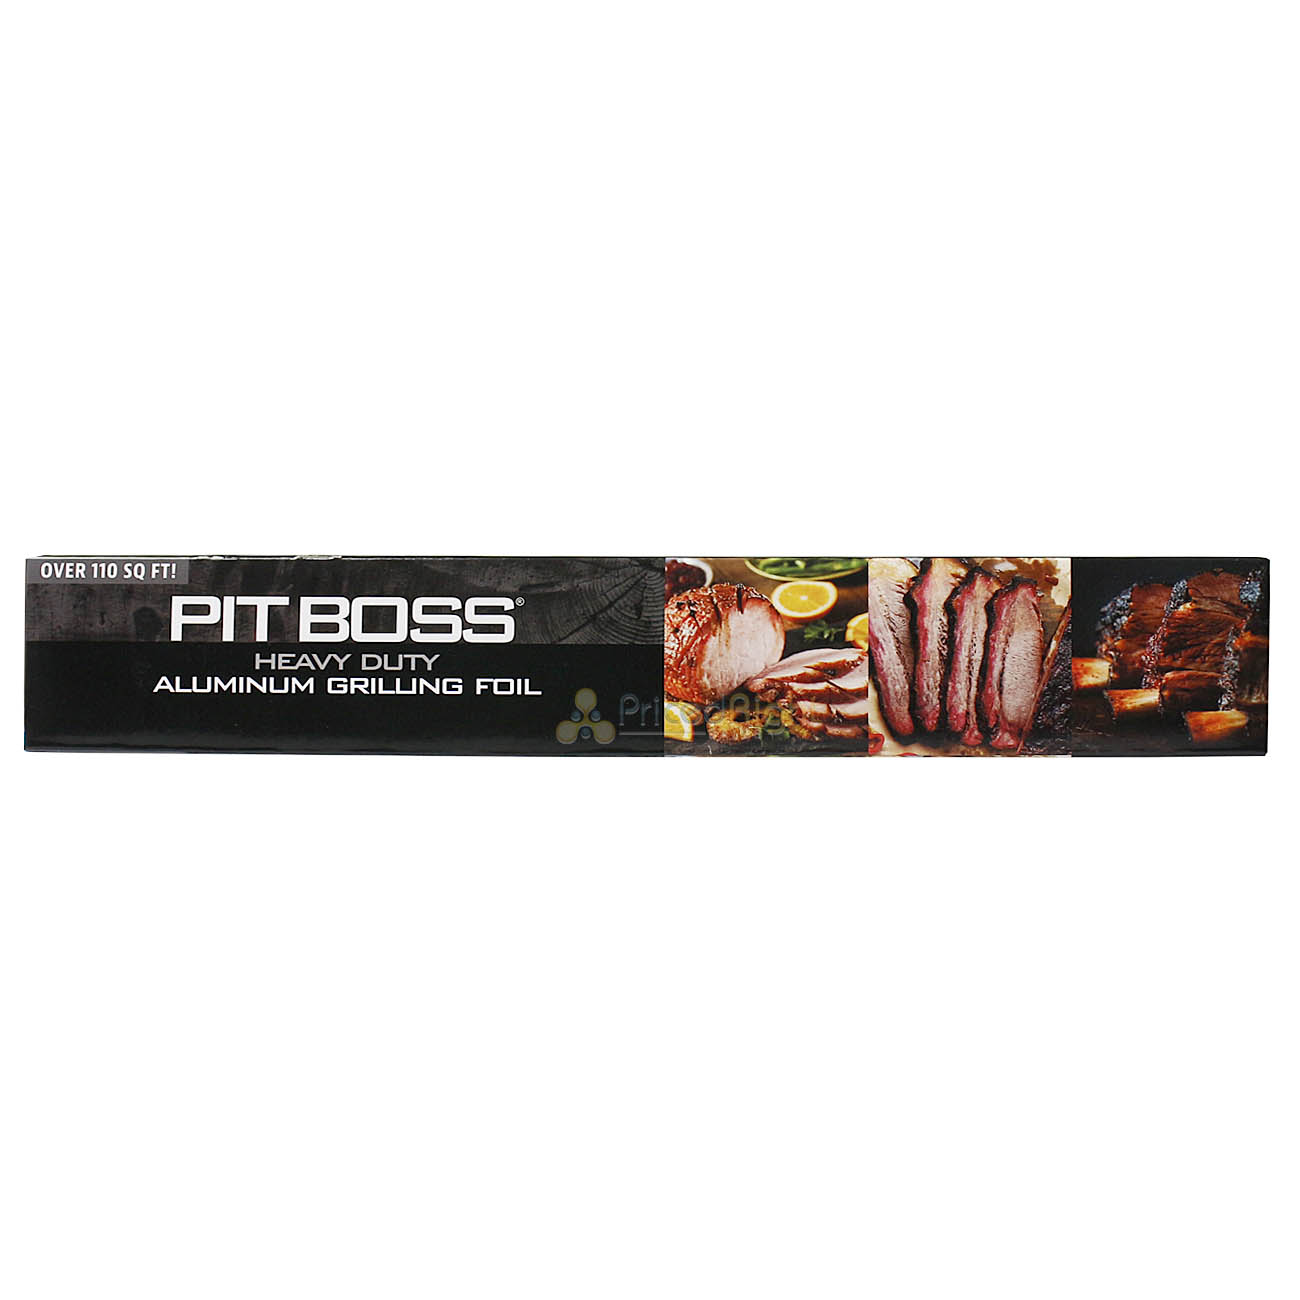 Pit Boss 12" x 75' All Purpose Aluminum Grilling Foil Heavy Duty One Roll 40435